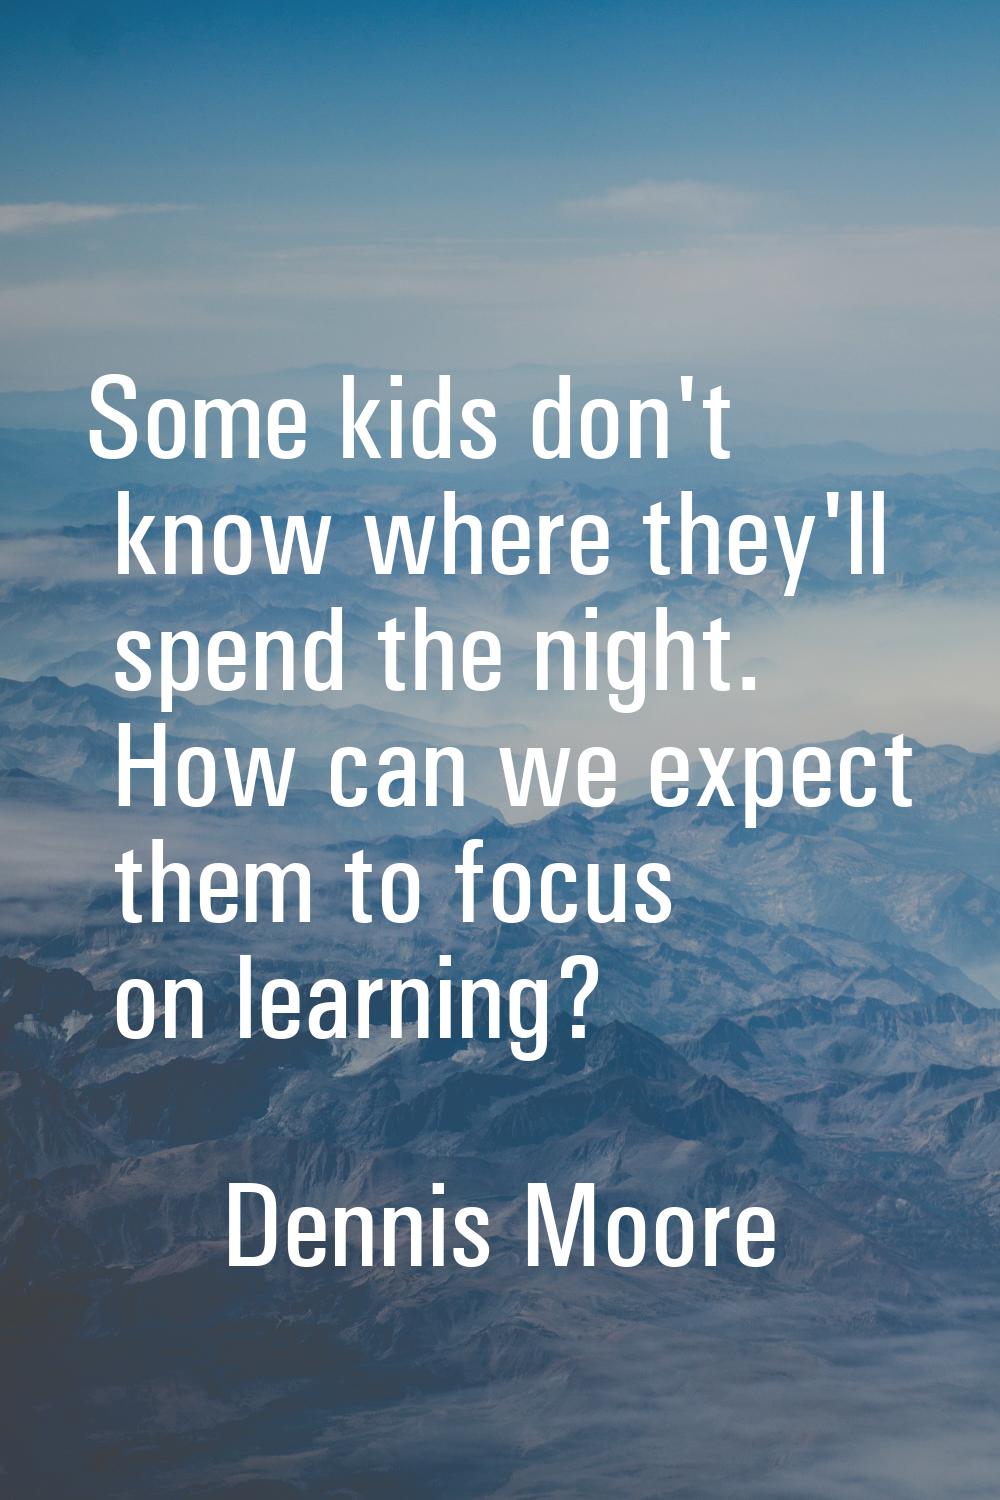 Some kids don't know where they'll spend the night. How can we expect them to focus on learning?